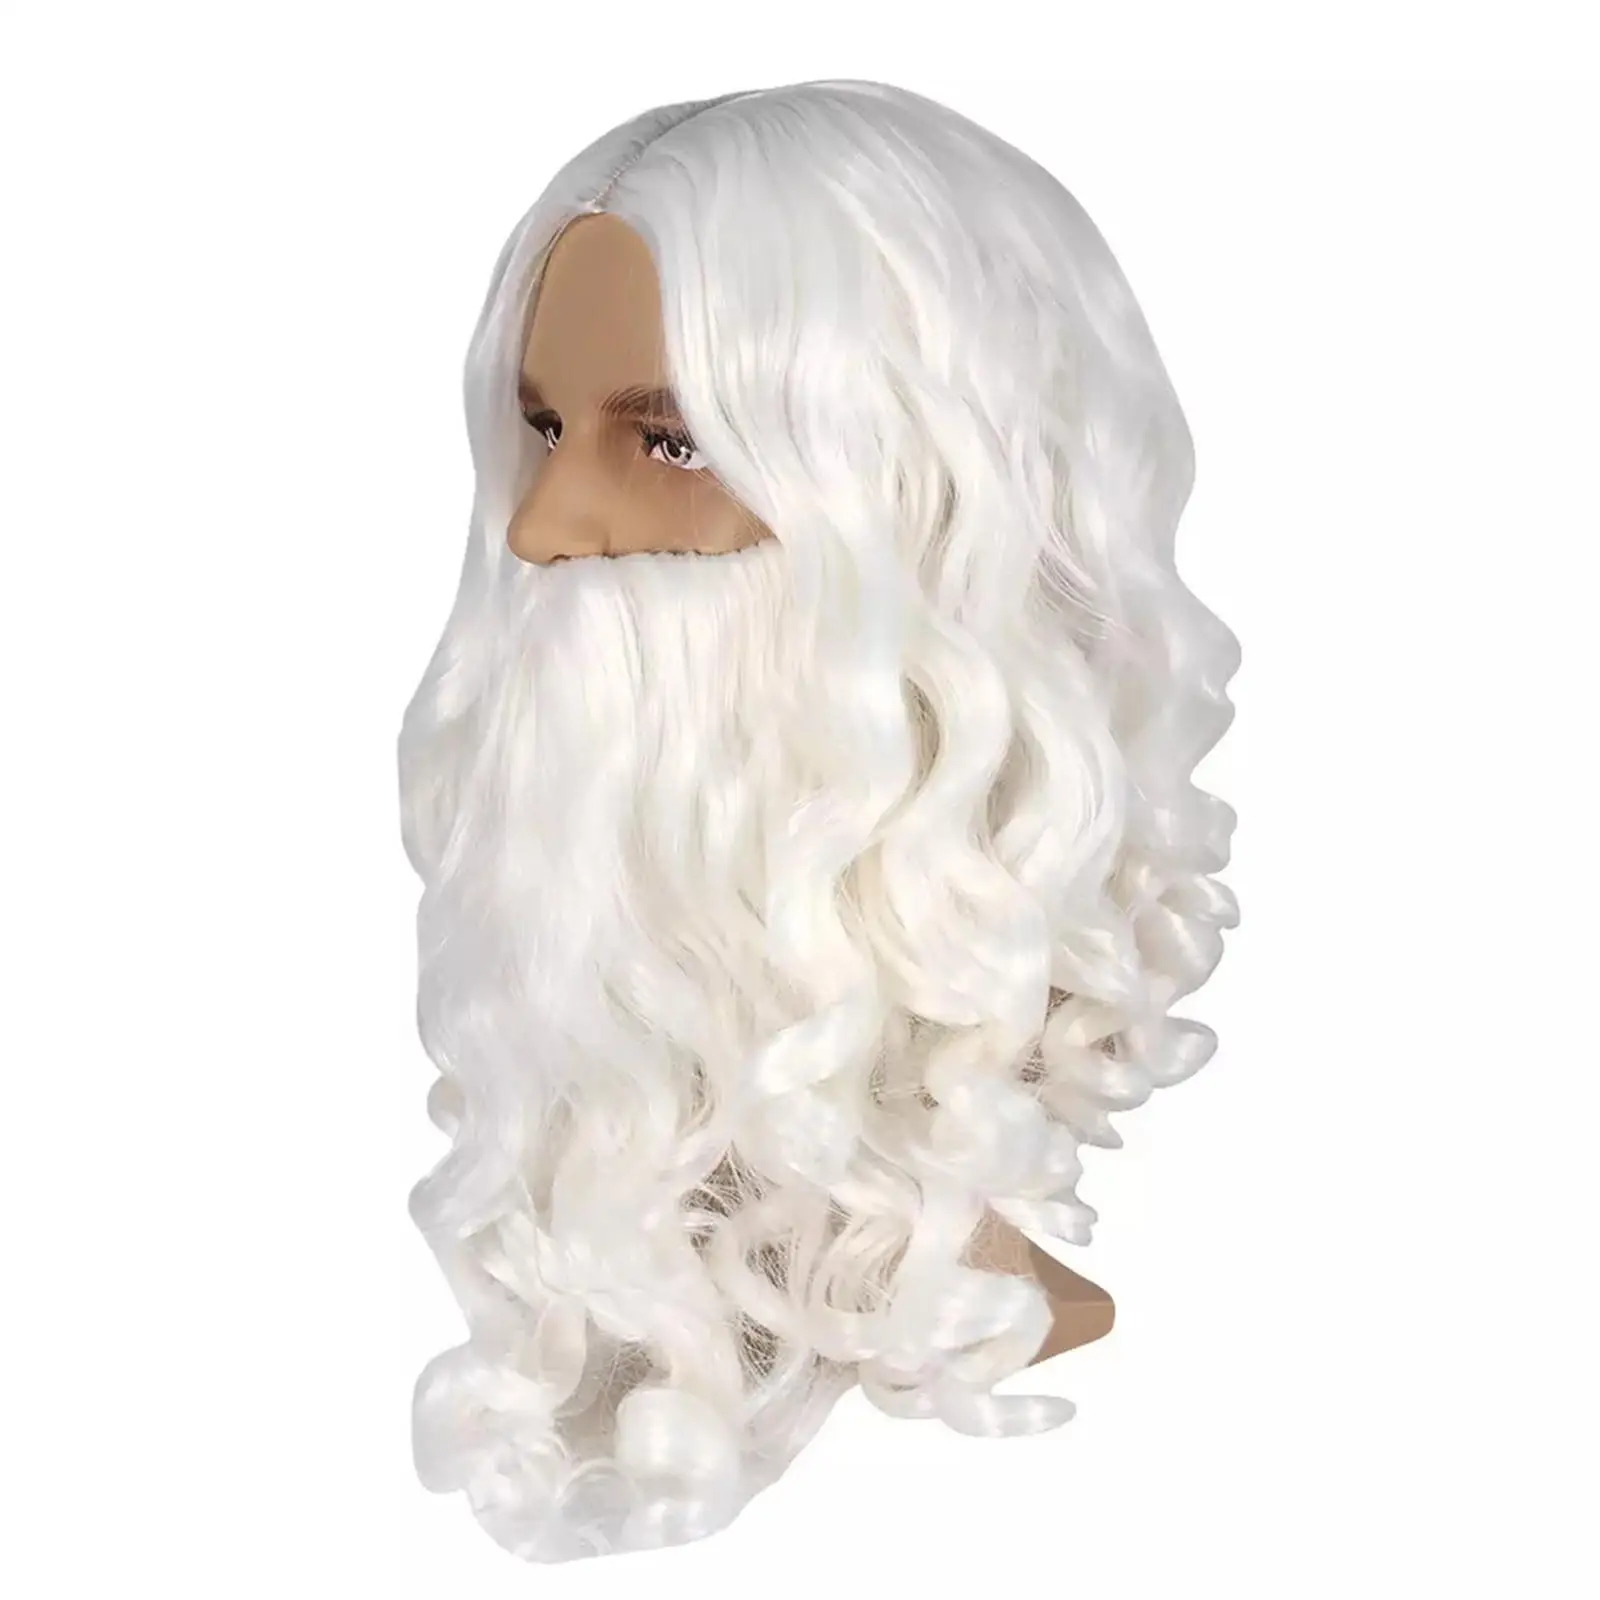 Santa Hair and Beard Set for Christmas Roles Play Lightweight Funny Santa Claus Costume Accessories Dressing up for Festivals